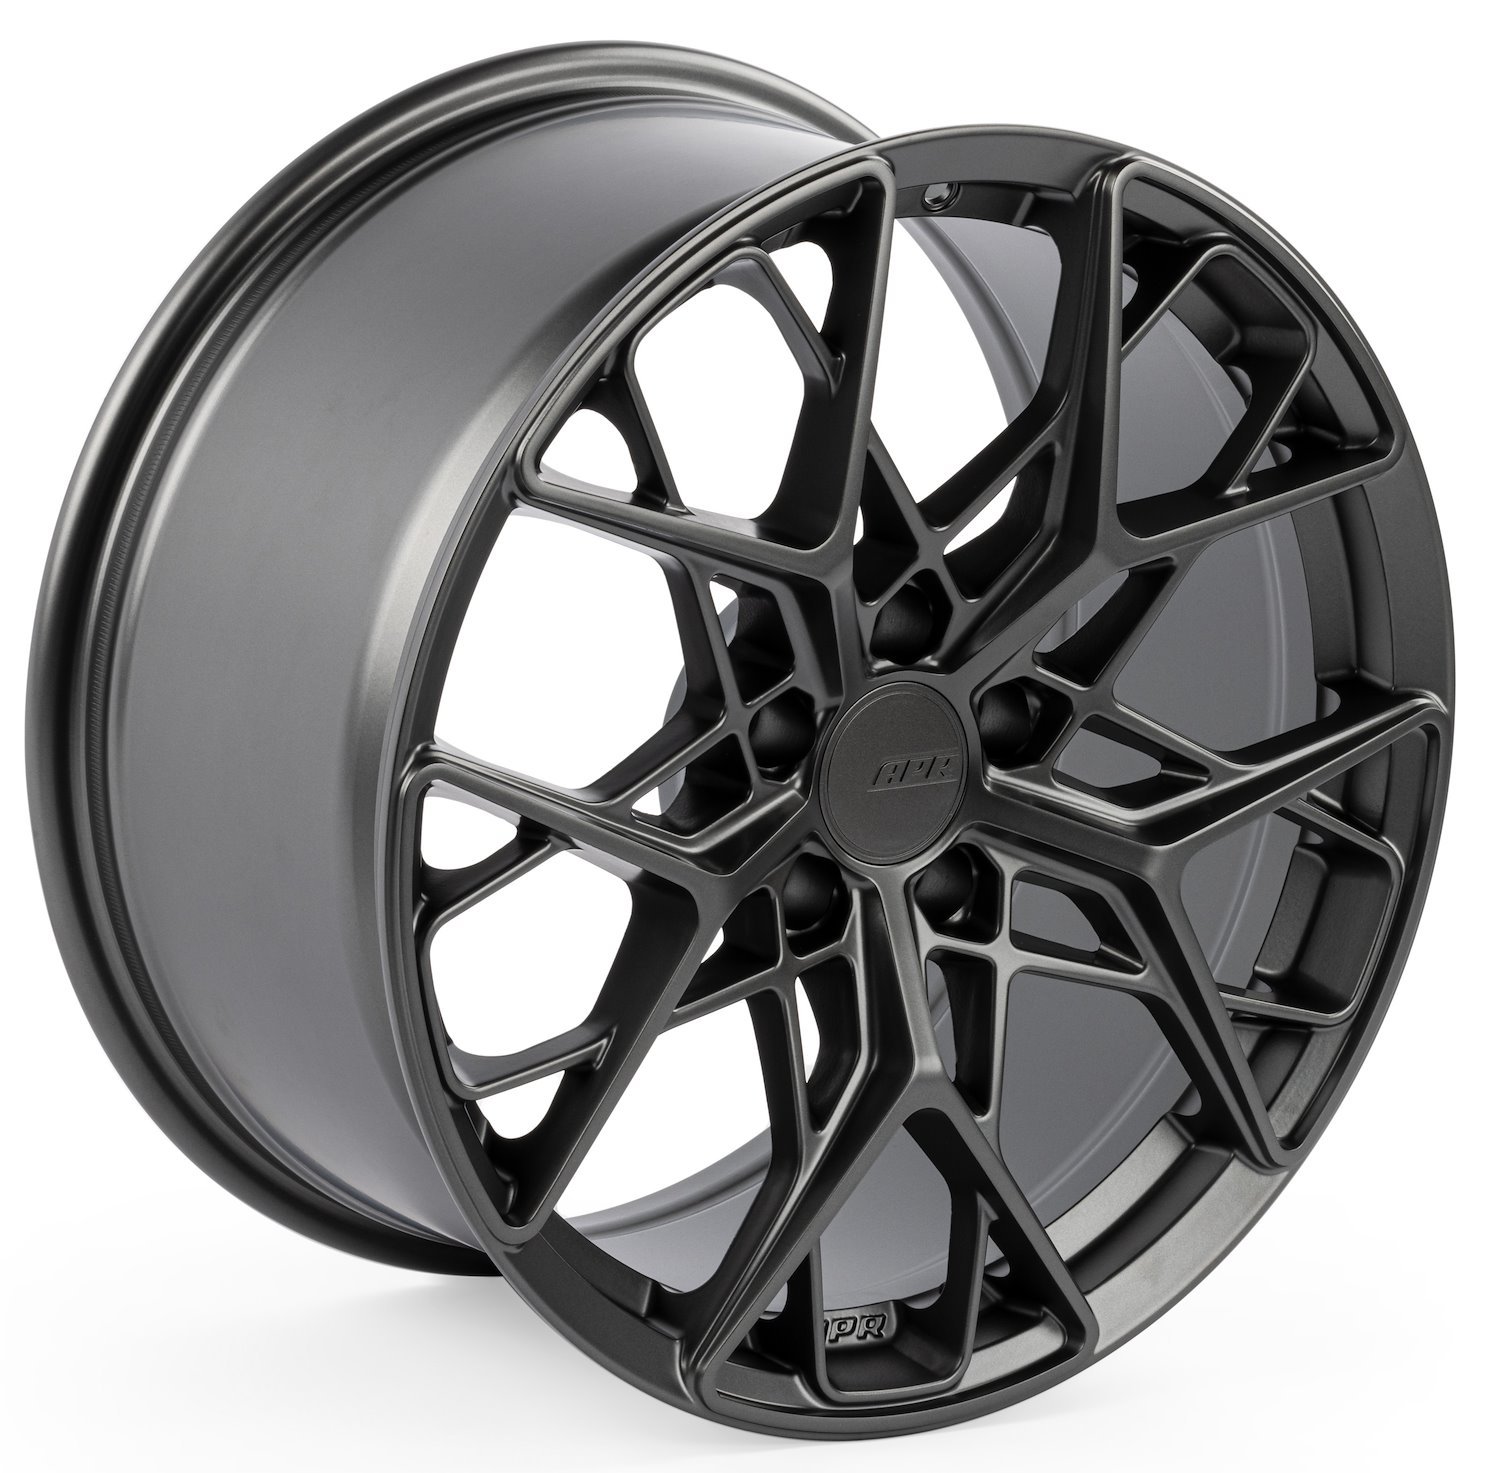 A02 Flow-Formed Wheel, Size: 19 x 9" [Anthracite]